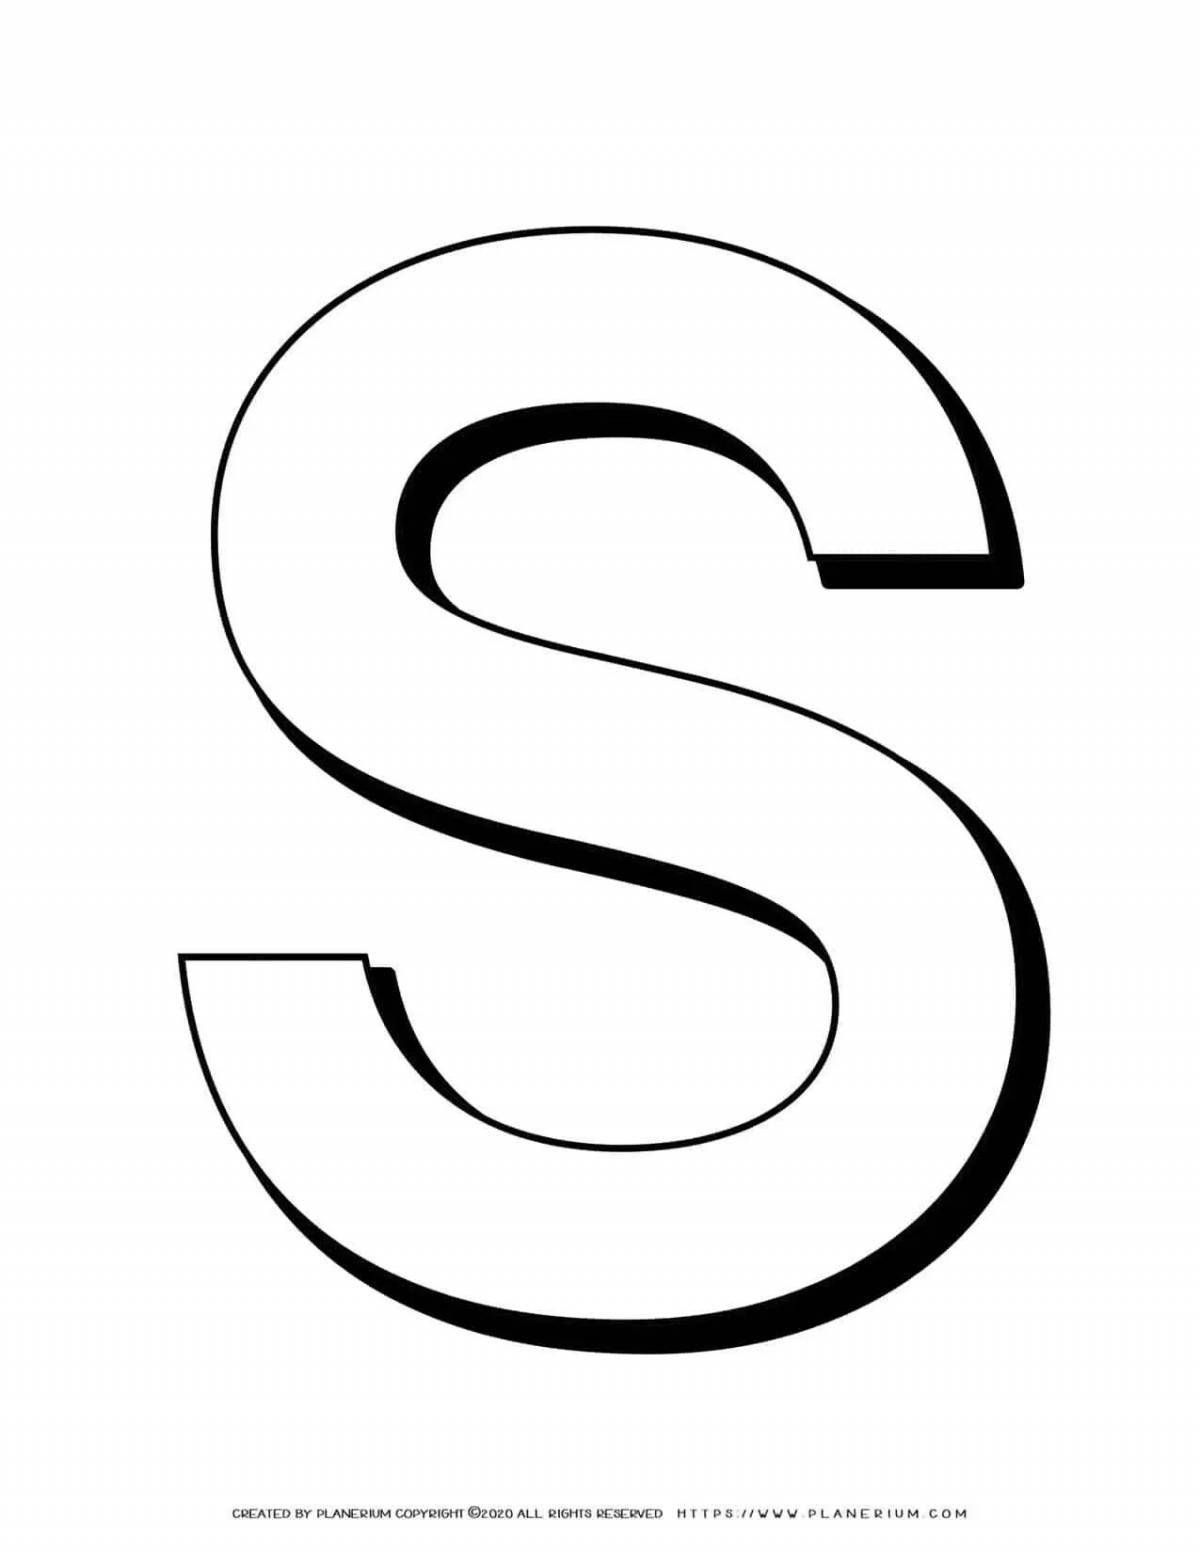 Coloring page dazzling letter s